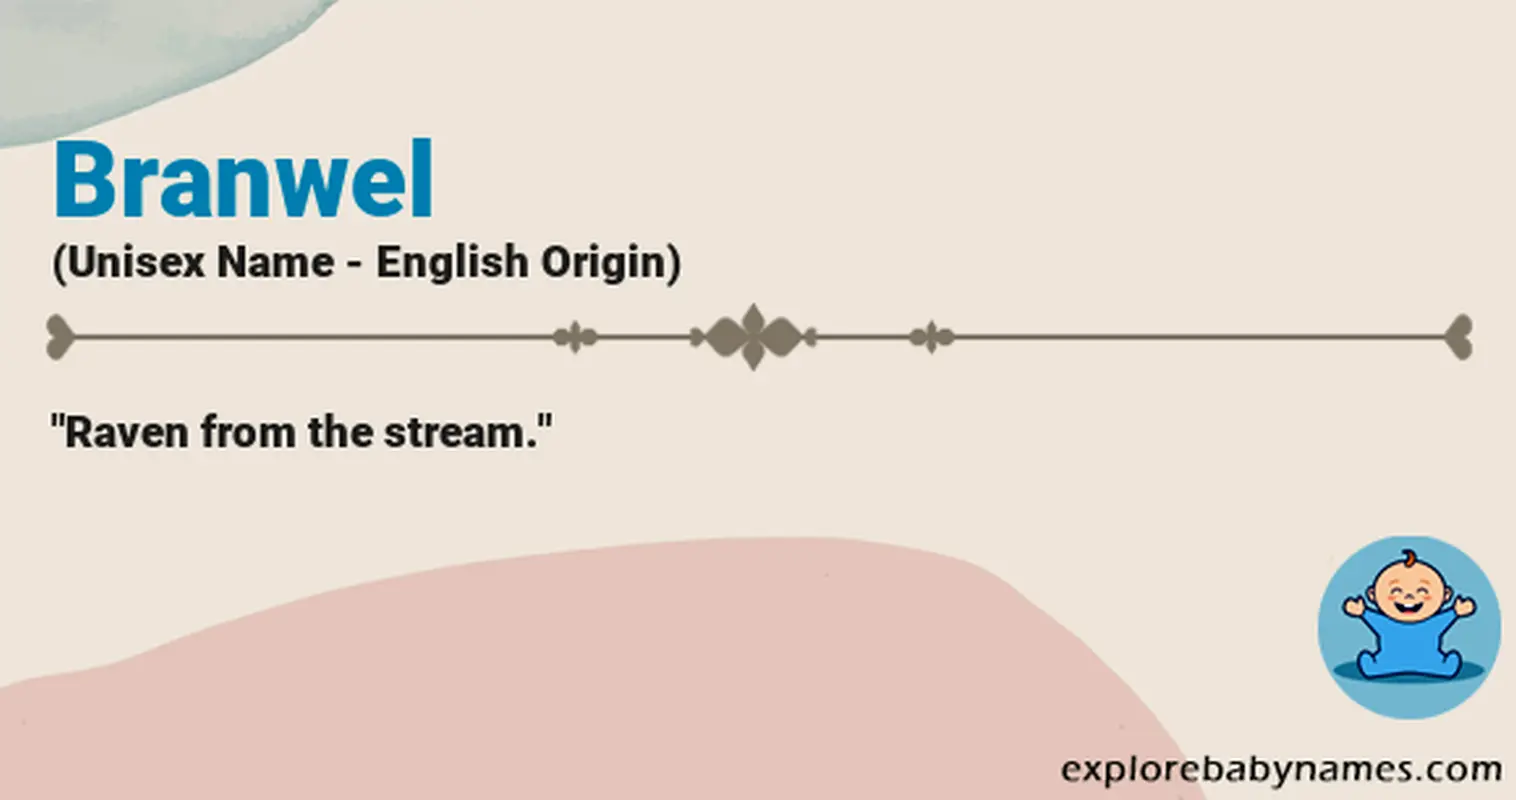 Meaning of Branwel